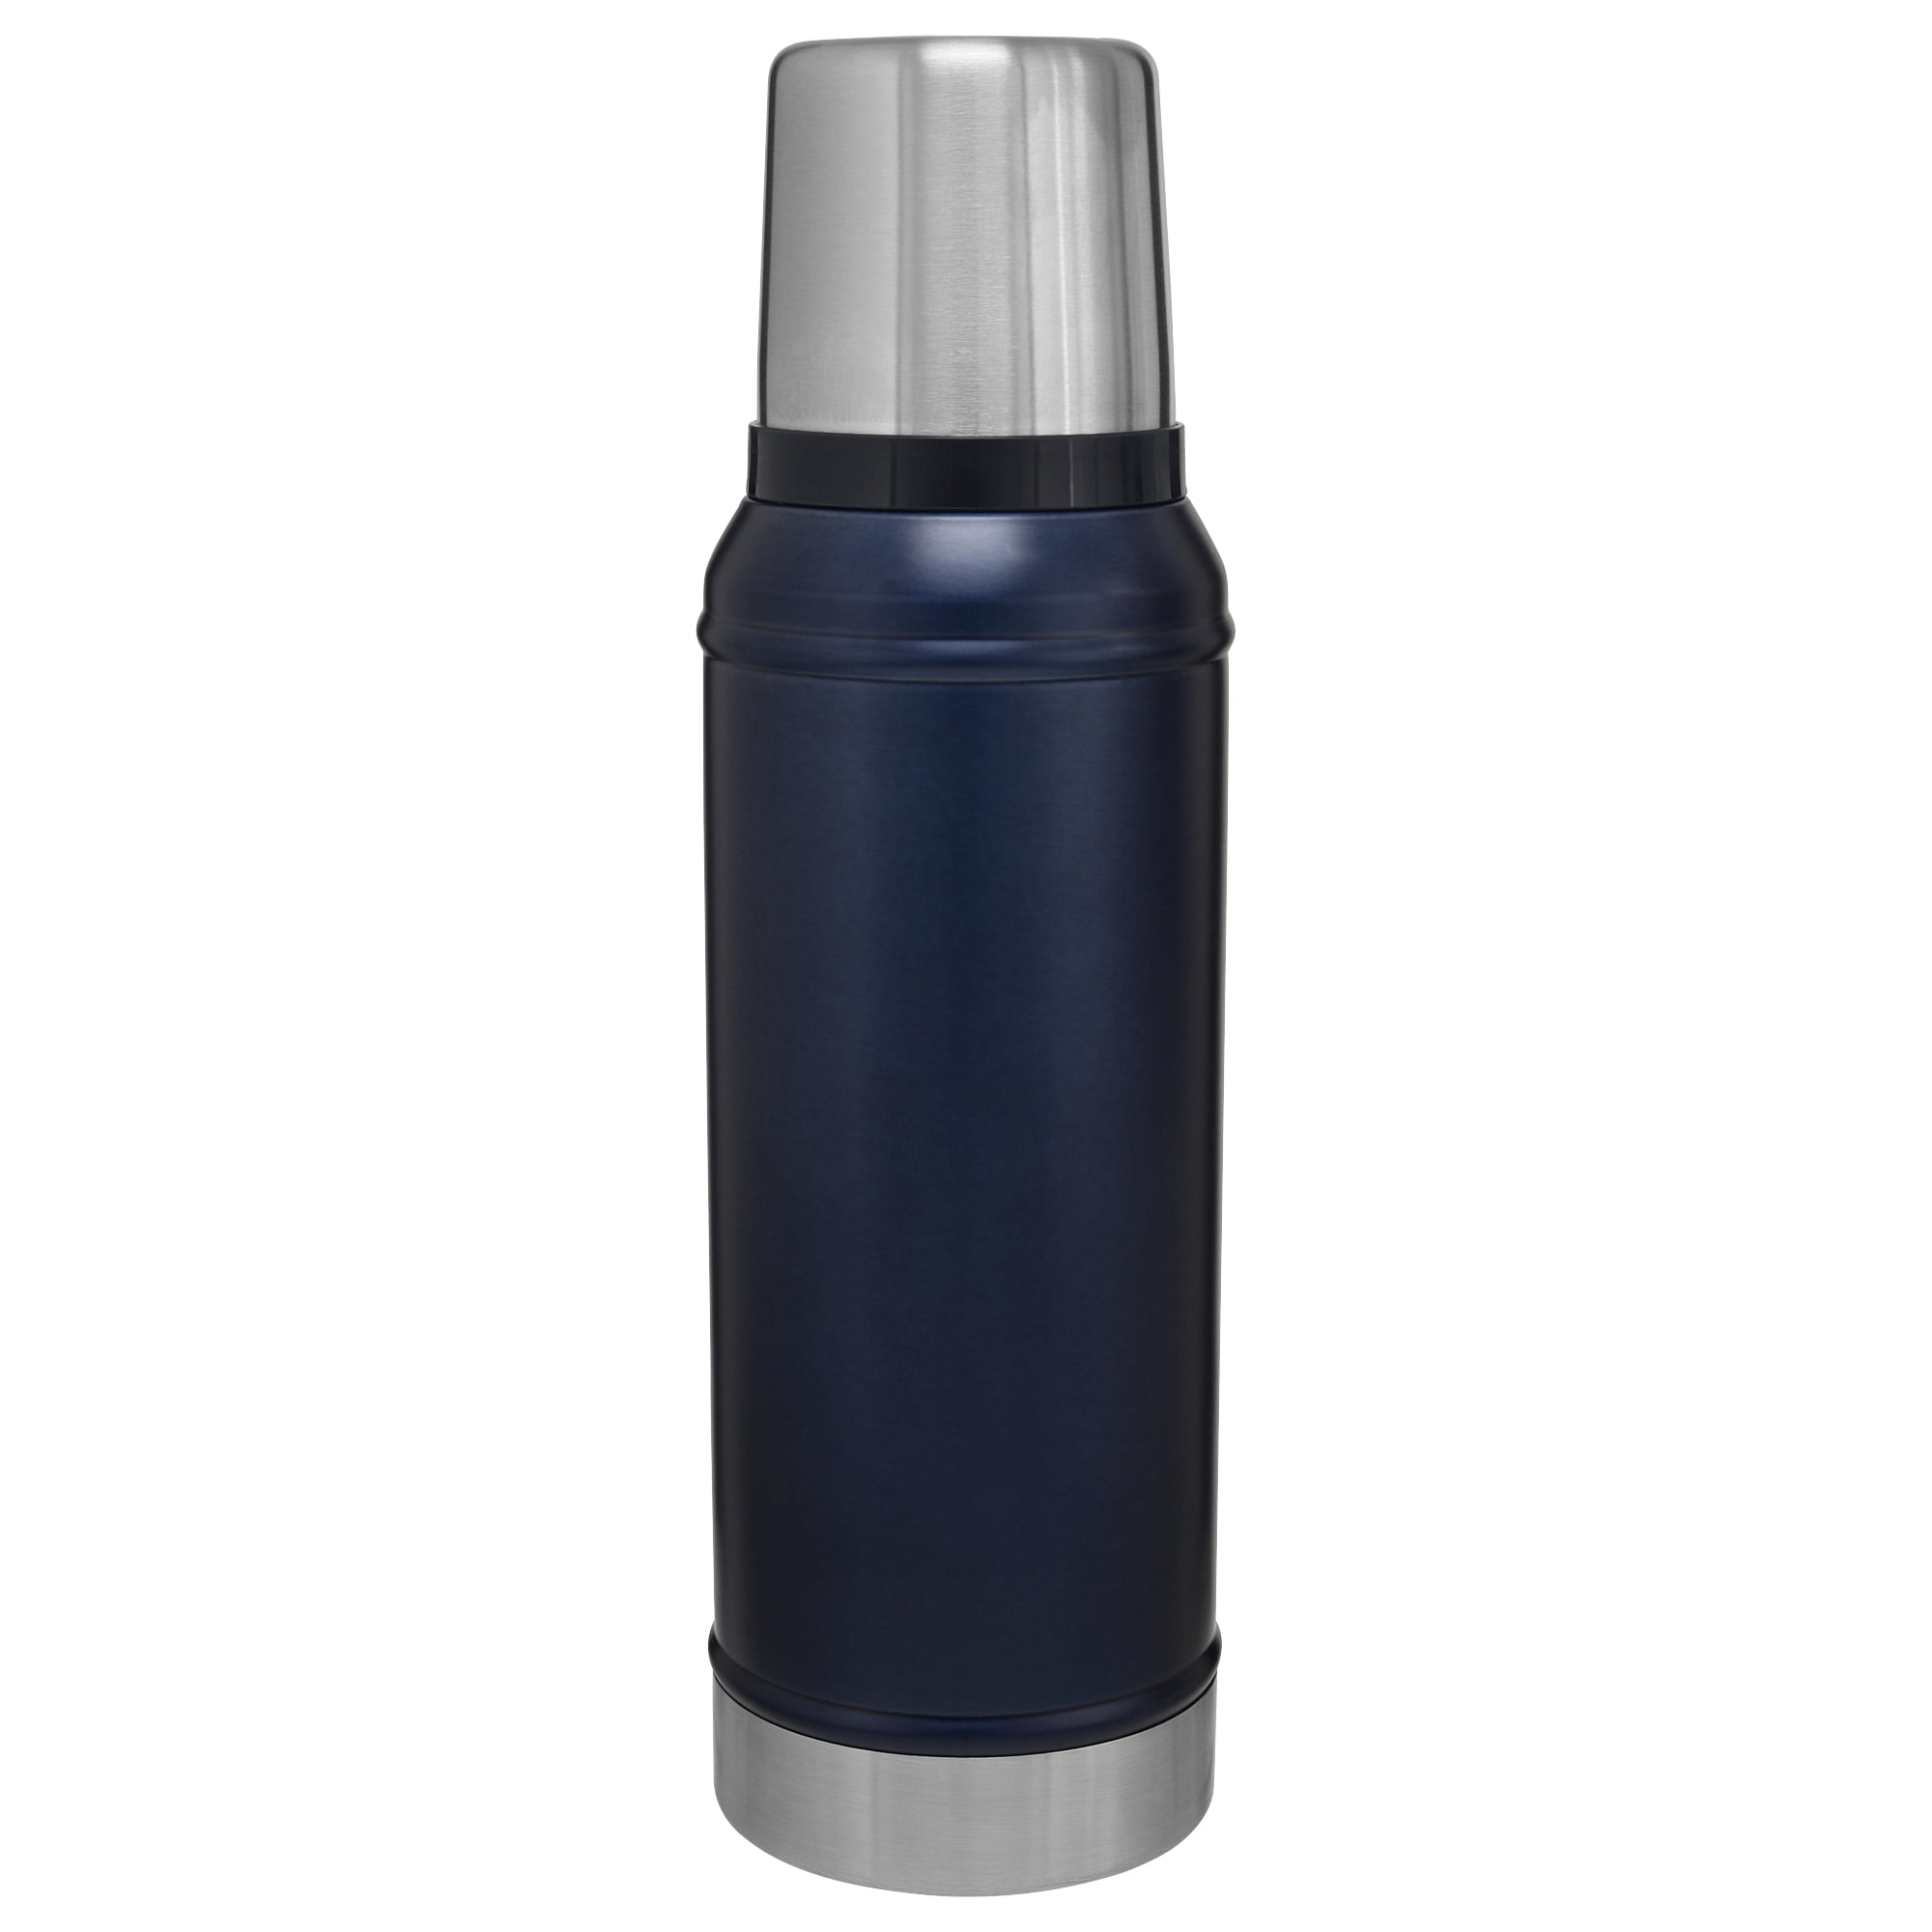 STANLEY DK NAVY BLUE THERMOS 1.1 QT CLASSIC BUILT FOR LIFE SINCE 1913 NO CUP